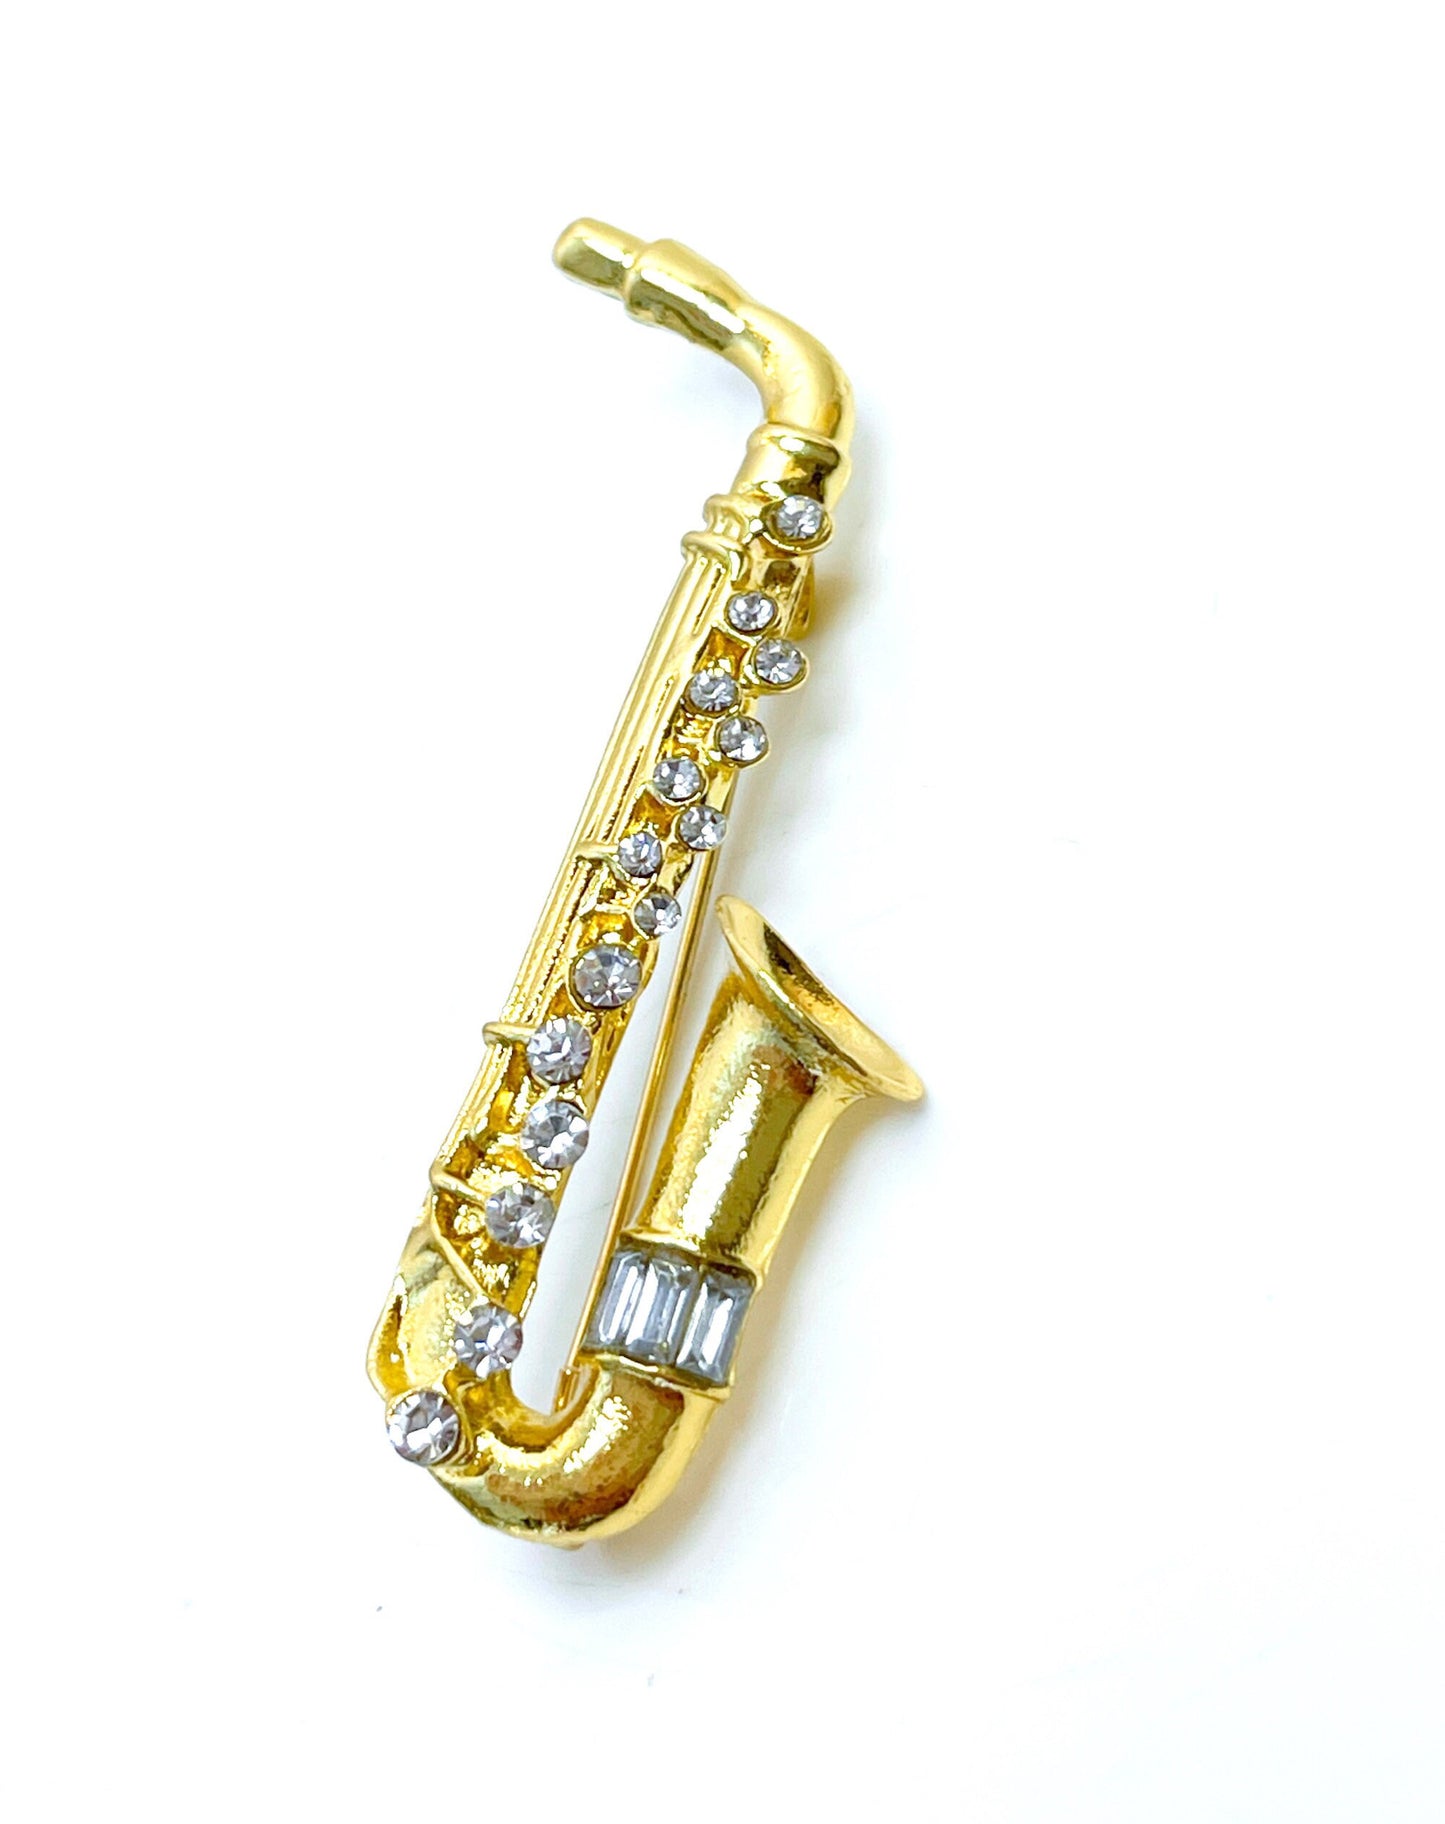 Gold Saxophone Brooch with Crystals, Fashion Brooch, Unisex Jewellery, Music Lovers Brooch, Wind Instrument Pin, Sax Lovers Gift